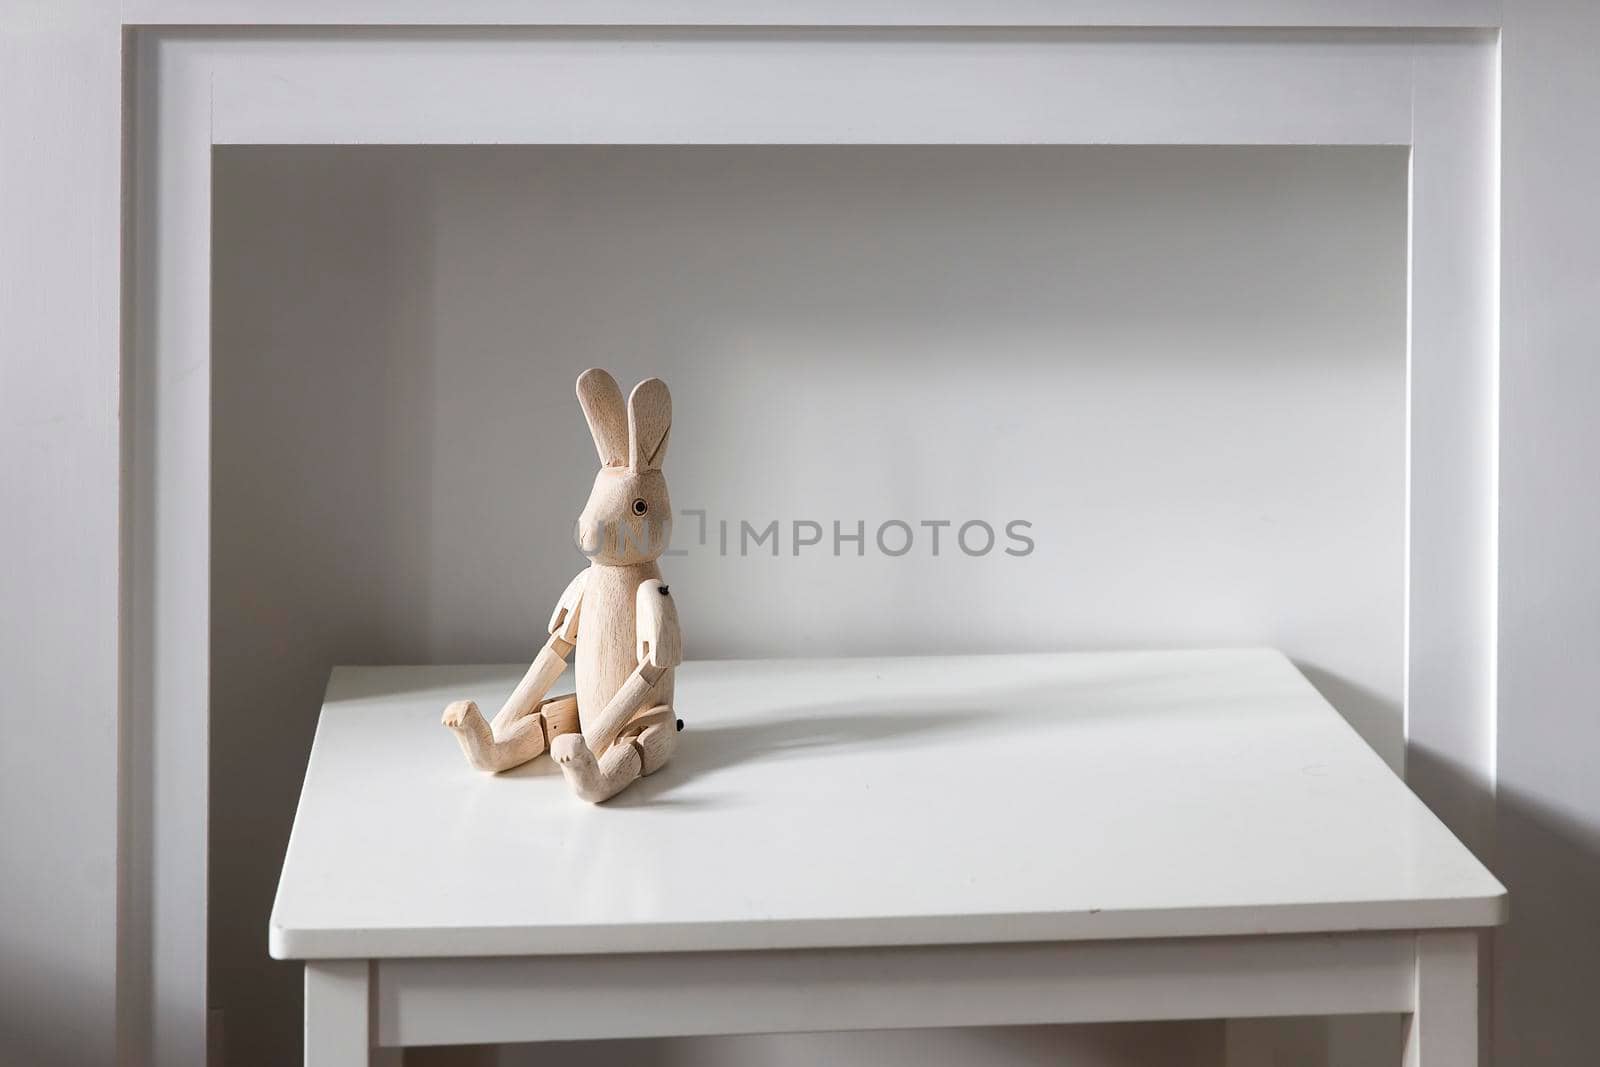 An unpainted wooden hare on hinges is on a white table in front of a fake fireplace. Place for text